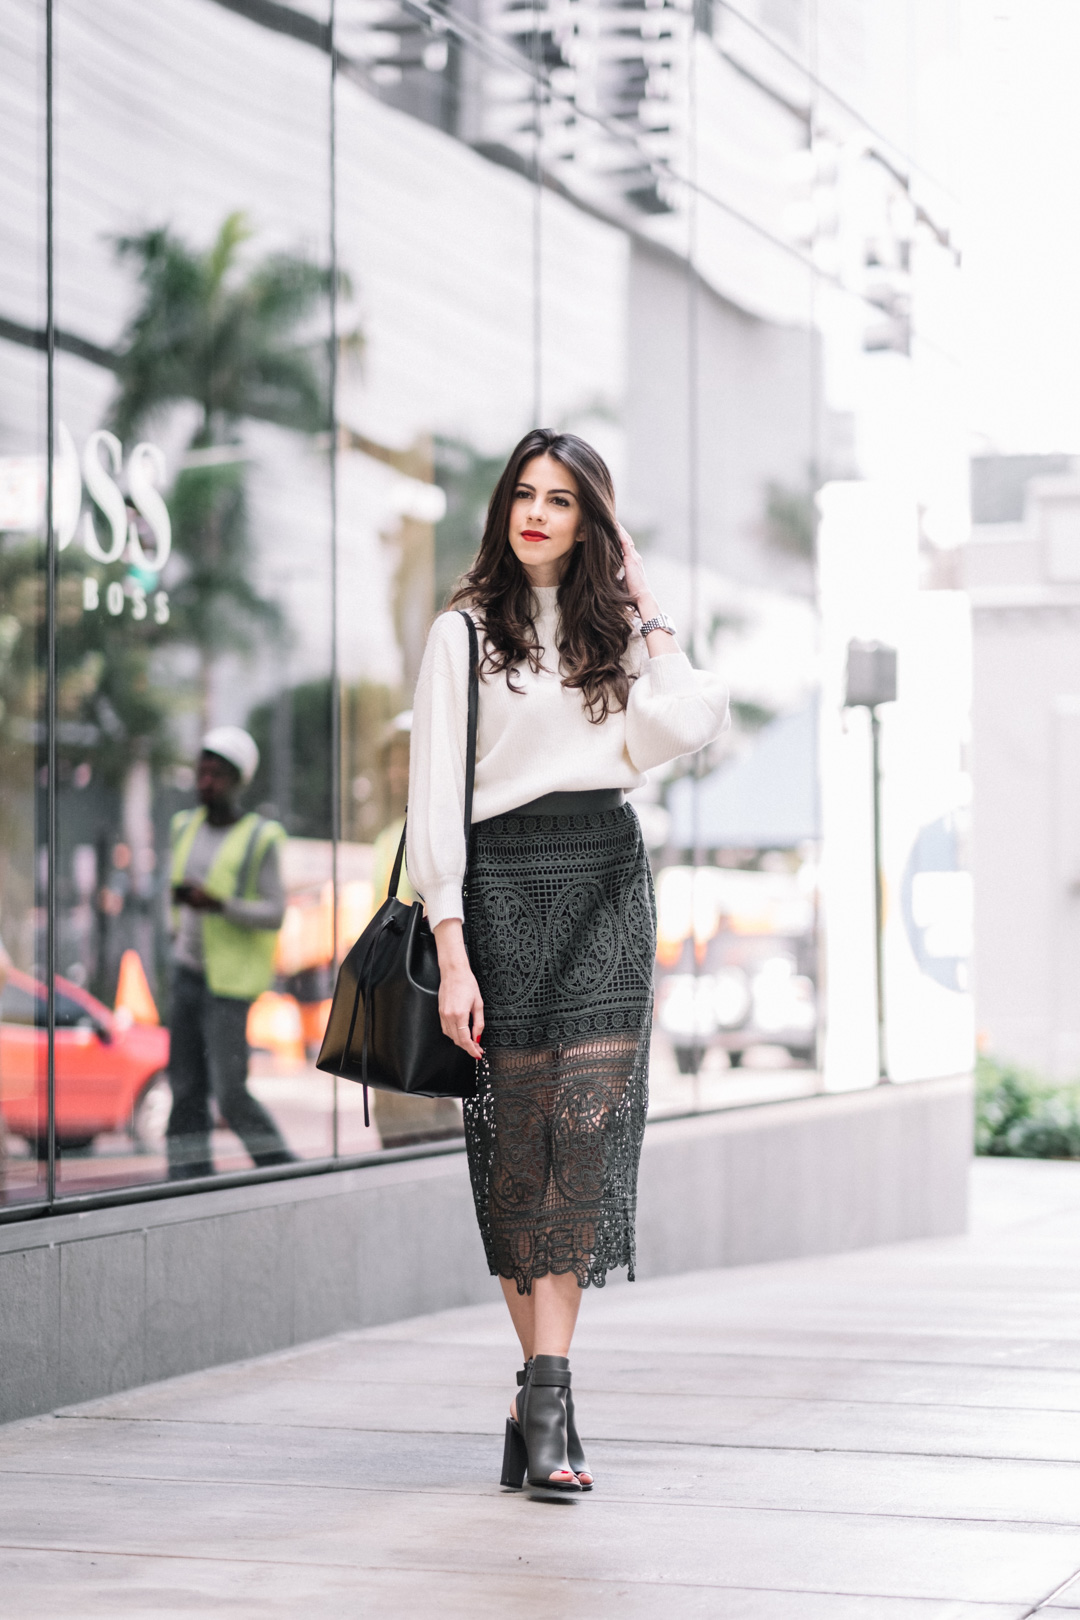 Jackie Roque styling a Topshop Lace skirt, Mansur Gavriel Bucket bag and Vince shoes